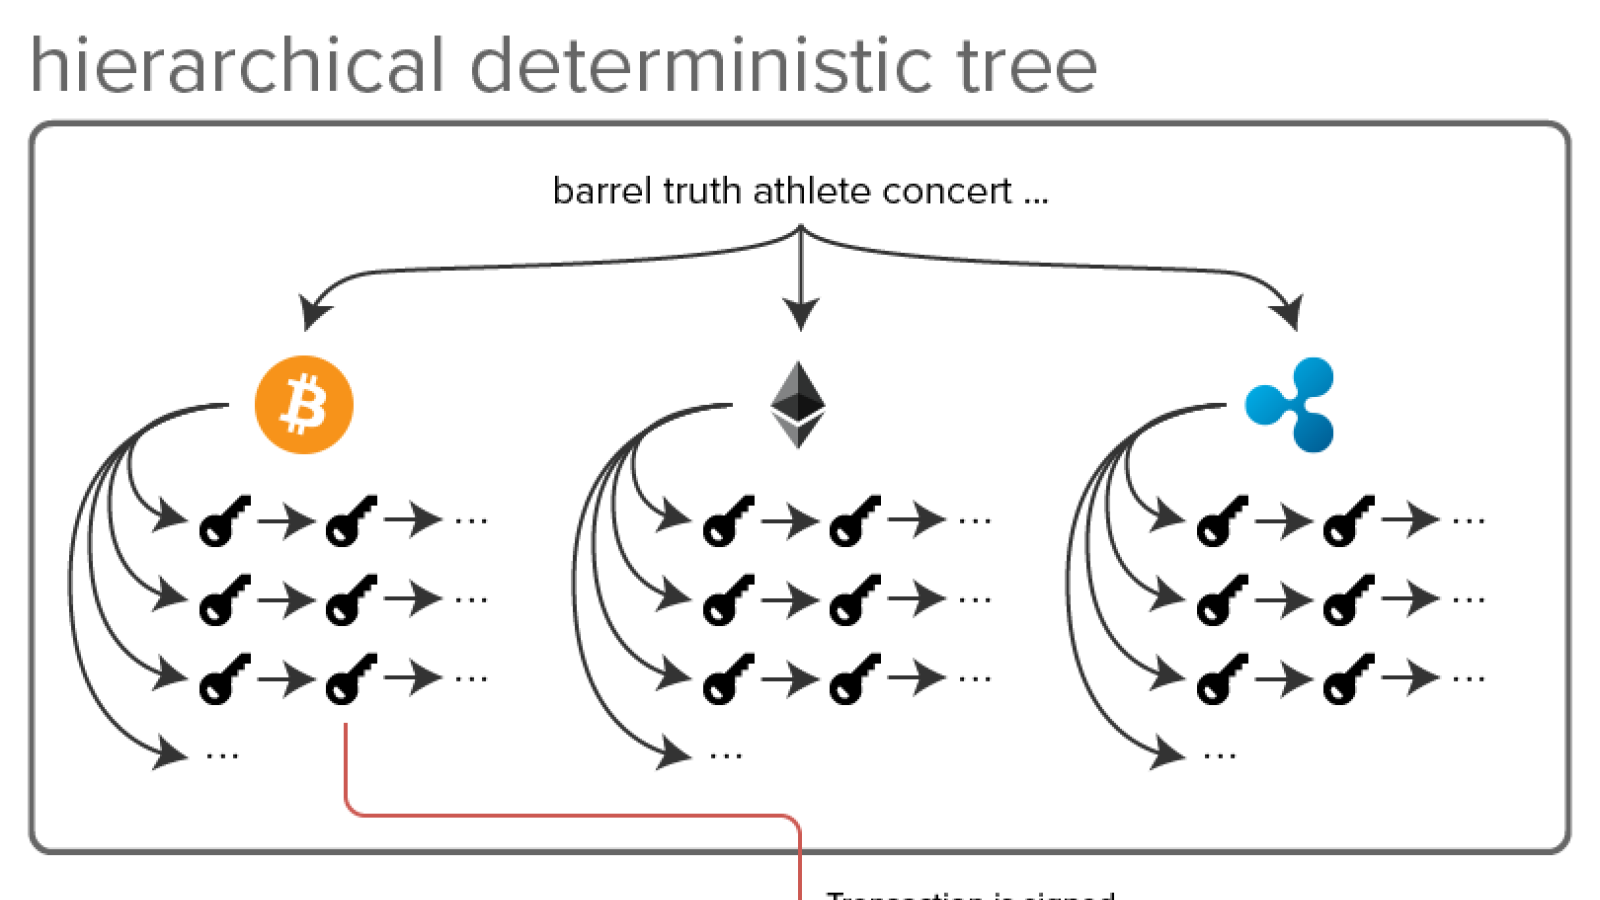 Hierarchical deterministic tree